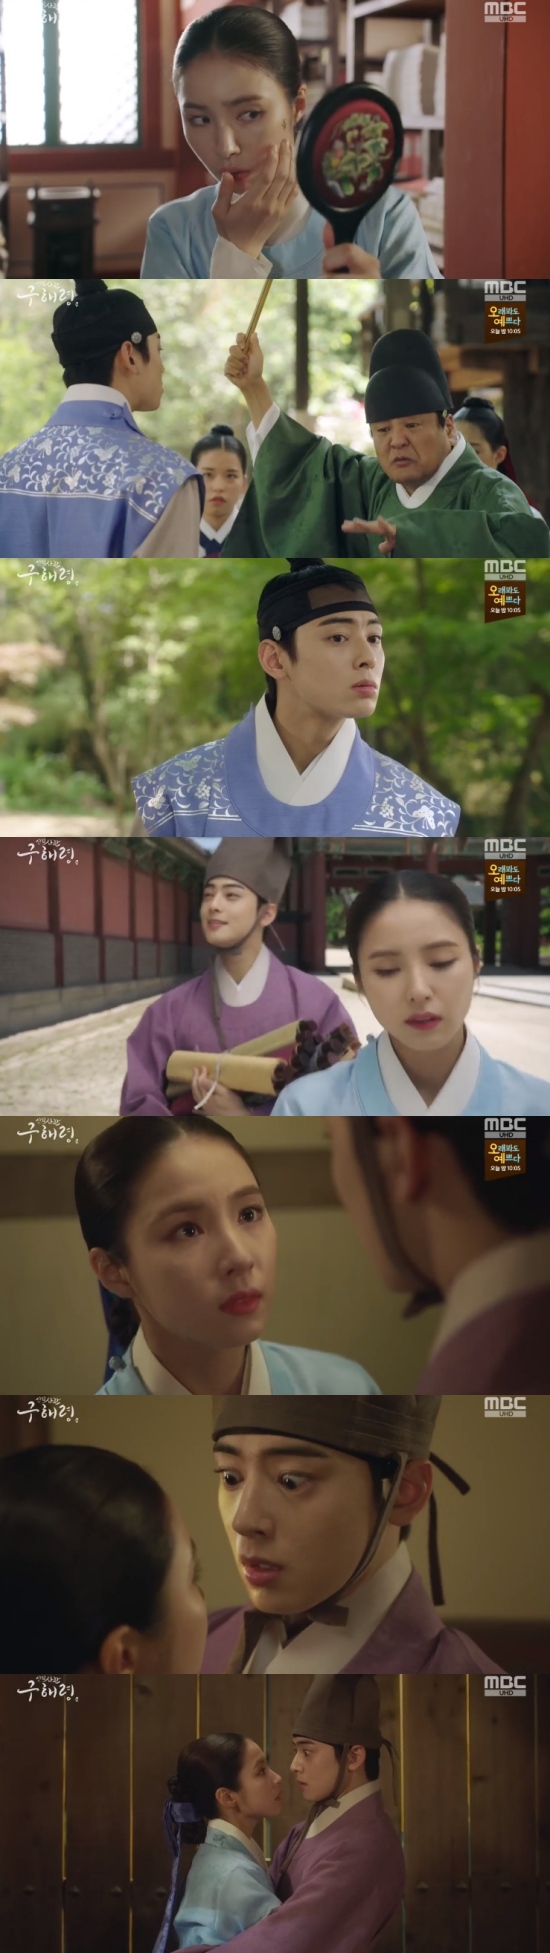 The new recruits, Na Hae-ryung, Jung Eun-woo and Shin Se-kyung, showed their excitement toward each other.In the 11th and 12th episodes of Na Hae-ryung, which was broadcast on the 1st, Lee Rim (Cha Jung Eun-woo) and Na Hae-ryung (Shin Se-kyung) were shown comforting each other.On this day, Na Hae-ryung was hated by the frosts because he raised an appeal to Nokbong, and Na Hae-ryung tried to hold back tears, and Irim, who noticed it, moved away.Na Hae-ryung was able to cry freely thanks to Lee Rim.Then Na Hae-ryung thanked him for saying, Thank you for what happened today. Lee said, What do you mean? You had an entrance exam.I do not think there was anything to be grateful for. Furthermore, Irim said, I want to cry again next time. Come here. I will leave the room anytime.Im afraid Ill be embarrassed if I get caught by others. Be careful. Dont cry again by yourself. Irim was later informed of the situation of Na Hae-ryung.Irim worked for him all night, working for Na Hae-ryung, and then disguised himself as a frost and helped him work as a presbyterian.In the process, Na Hae-ryung and Irim went out alone and were in crisis because they broke curfew time.I was worried that Mama was a lot more than that because she had no favors, said Na Hae-ryung, who said, What punishment would you have if you broke the curfew?Na Hae-ryung said, I will go out and attract attention, so Mama will go back to the palace.I heard it when I was writing my monthly meeting. Na Hae-ryung also knew what Irim said and embraced Irim, saying, Forgive my dignity; Sejo of JoseonMama.Soonra misunderstood Irim and Koo Hae-ryung, who embraced each other, as lovers, and passed without catching them.In addition, Koo Na Hae-ryung was forced to take Irim to his home.When Irim and Na Hae-ryung fell asleep in one room, they were forced to sleep outside for Na Hae-ryung.The next day, Na Hae-ryung said, Thank you for helping me yesterday and the frost work is good, so you do not have to come to the court anymore.This frost, he said, and Irim made a grim look.Why are you sorry, you have been suffering so much yesterday, said Na Hae-ryung, who wondered, I was good at being a hard worker.I was happy because it was the first time that someone had mixed up with people and called my name and had something to do with me. Na Hae-ryung said, But Mama has a novel.When I went to the bookstore, there were many other novels, and I have to come back to this place with plums. Irim said, Do not wait.I hate to write is a lie. I wonder. Why I had to let go of the brush. Why I never wrote again.Na Hae-ryung was surprised to say, Is that a name? And Irim said, Its not good for you. I hated my writing. Dont be so happy.I feel sad, he laughed.Im not happy at all, said Gu, and I think I know what the novel means to Mama, and how can I be happy that youve lost something so precious?Ive seen Mamas writing. It was straight and beautiful. So write it. Sejo of Joseon gives his servant a handwriting.Irim wrote a poem containing the contents of the Confessions of Love, and explained, I have a poem that I have in my heart, but I want to do this if it is a gift.The poem contained the contents of I wish my love lived for a long time and became my master forever.Irim said, I am saying that this is a poem I really like. It is not because of other hearts. I like this poem purely.In particular, Irim and Na Hae-ryung showed a favorable feeling to each other and foreshadowed romance.Photo = MBC Broadcasting Screen